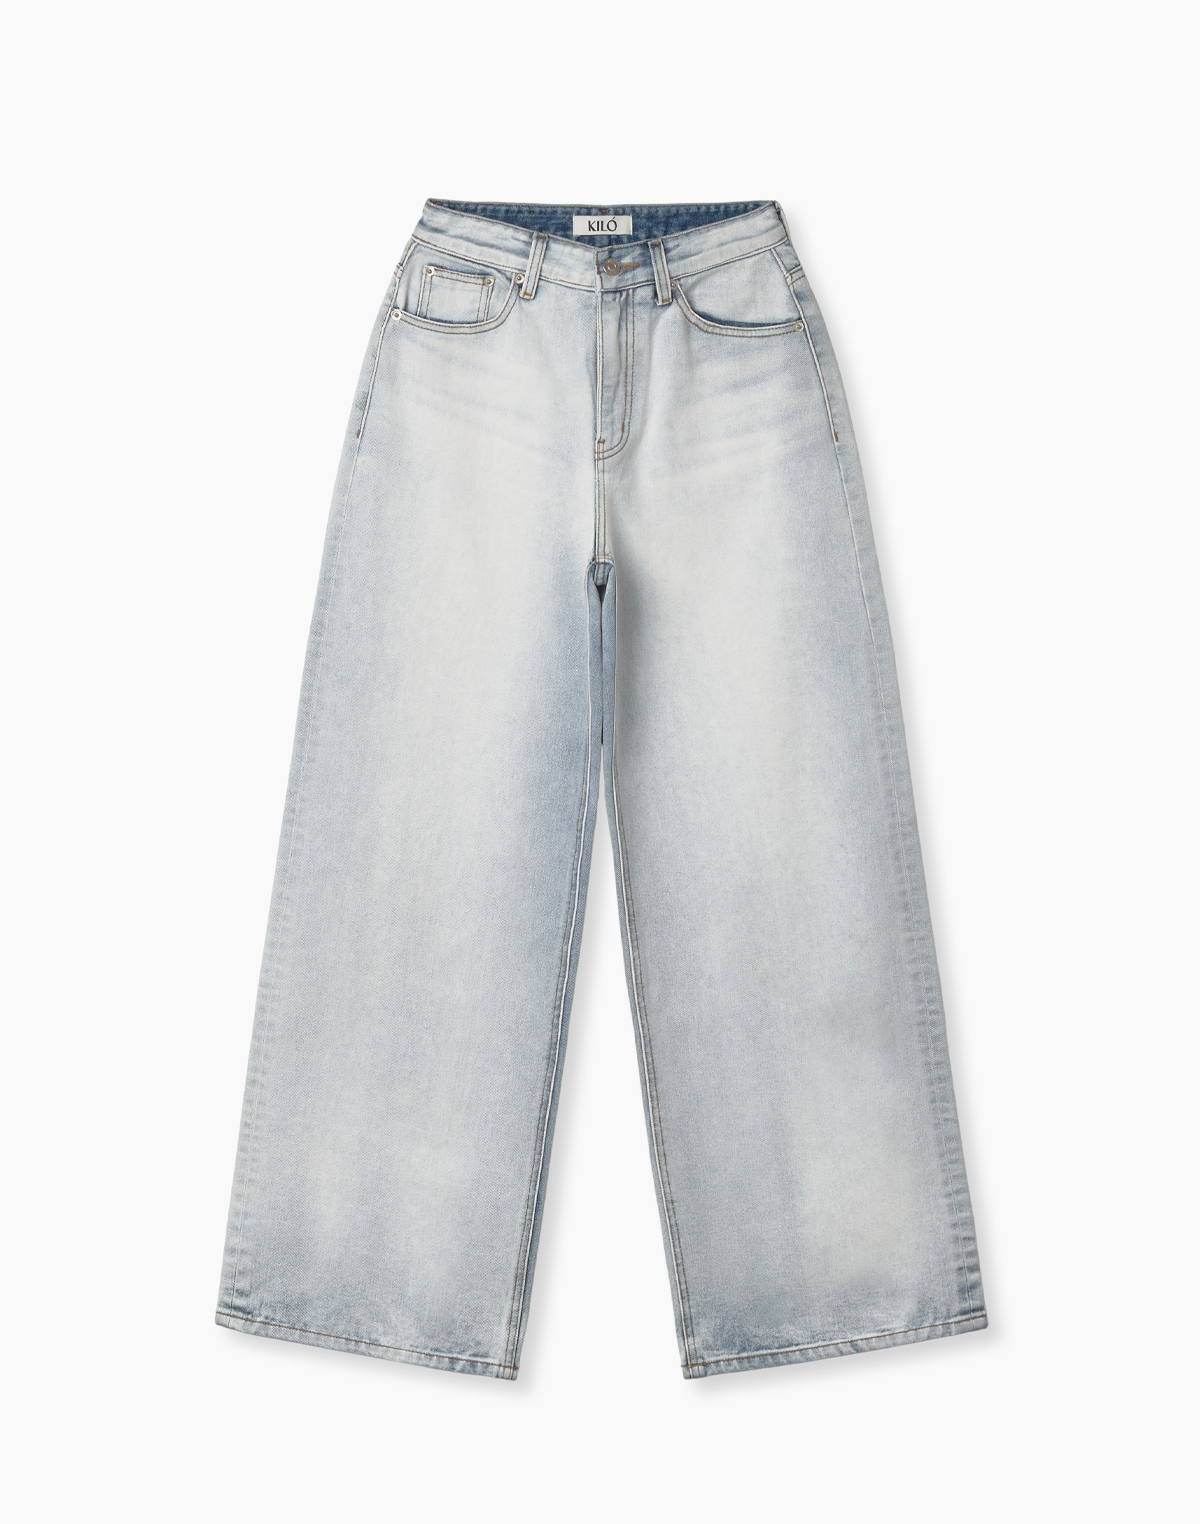 WIDE SAND JEANS (ICE BLUE)